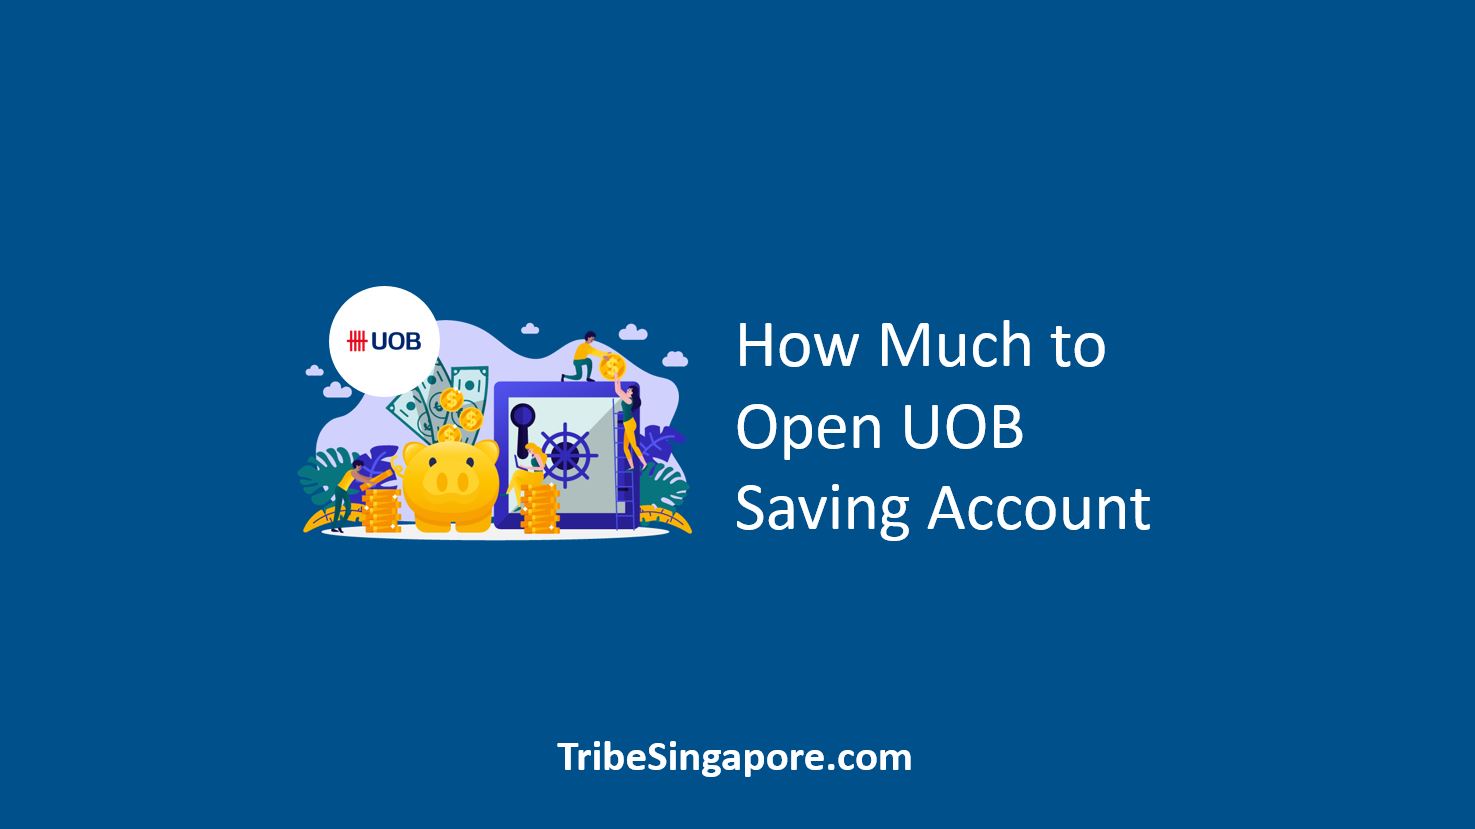 How Much to Open UOB Saving Account